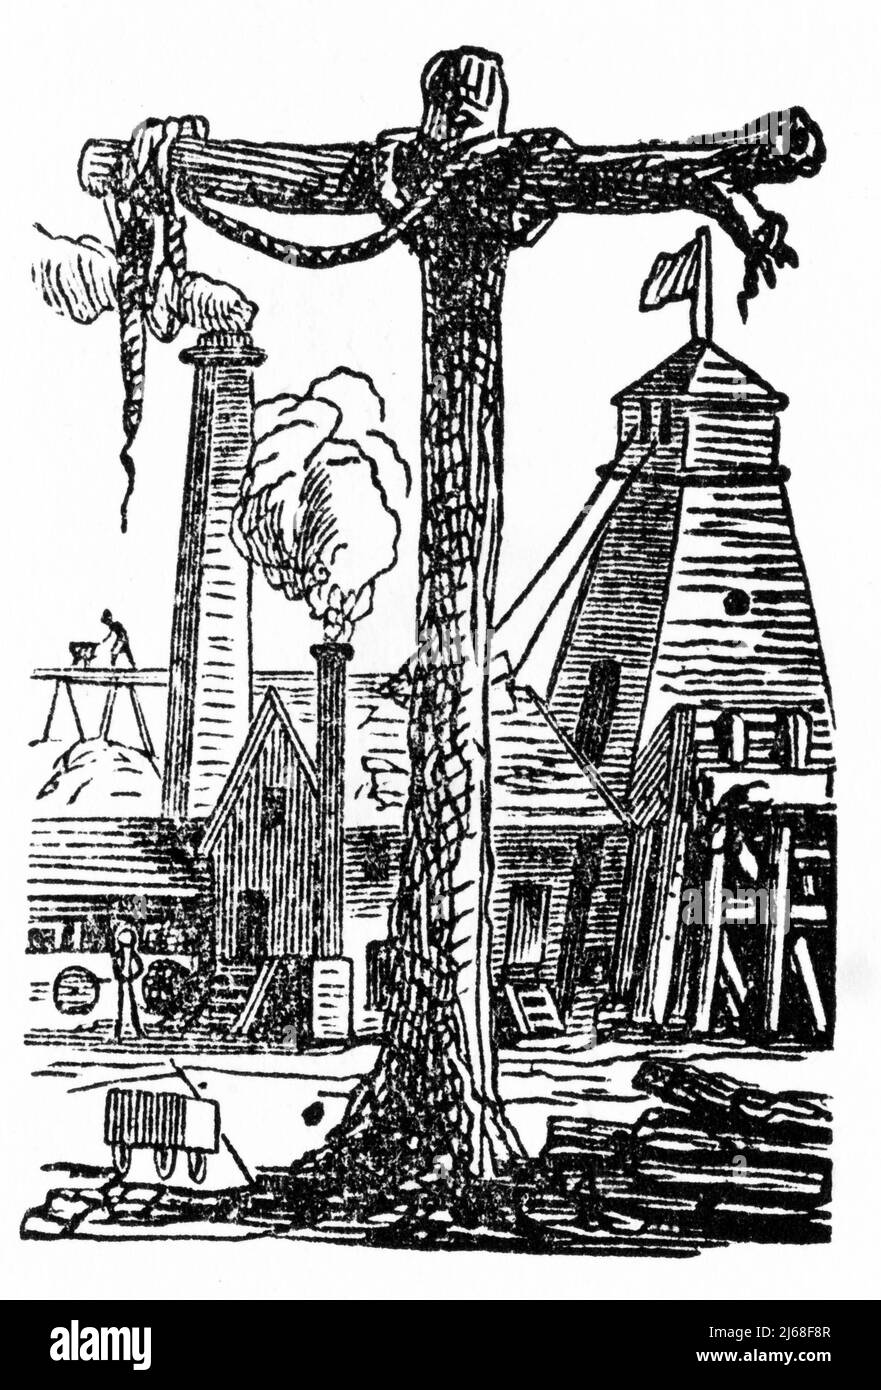 Engraving of embellished letter T from a chapter heading on the history of Ballarat, VIctoria, Australia. the illustration features elements of life on the goldfields. Stock Photo